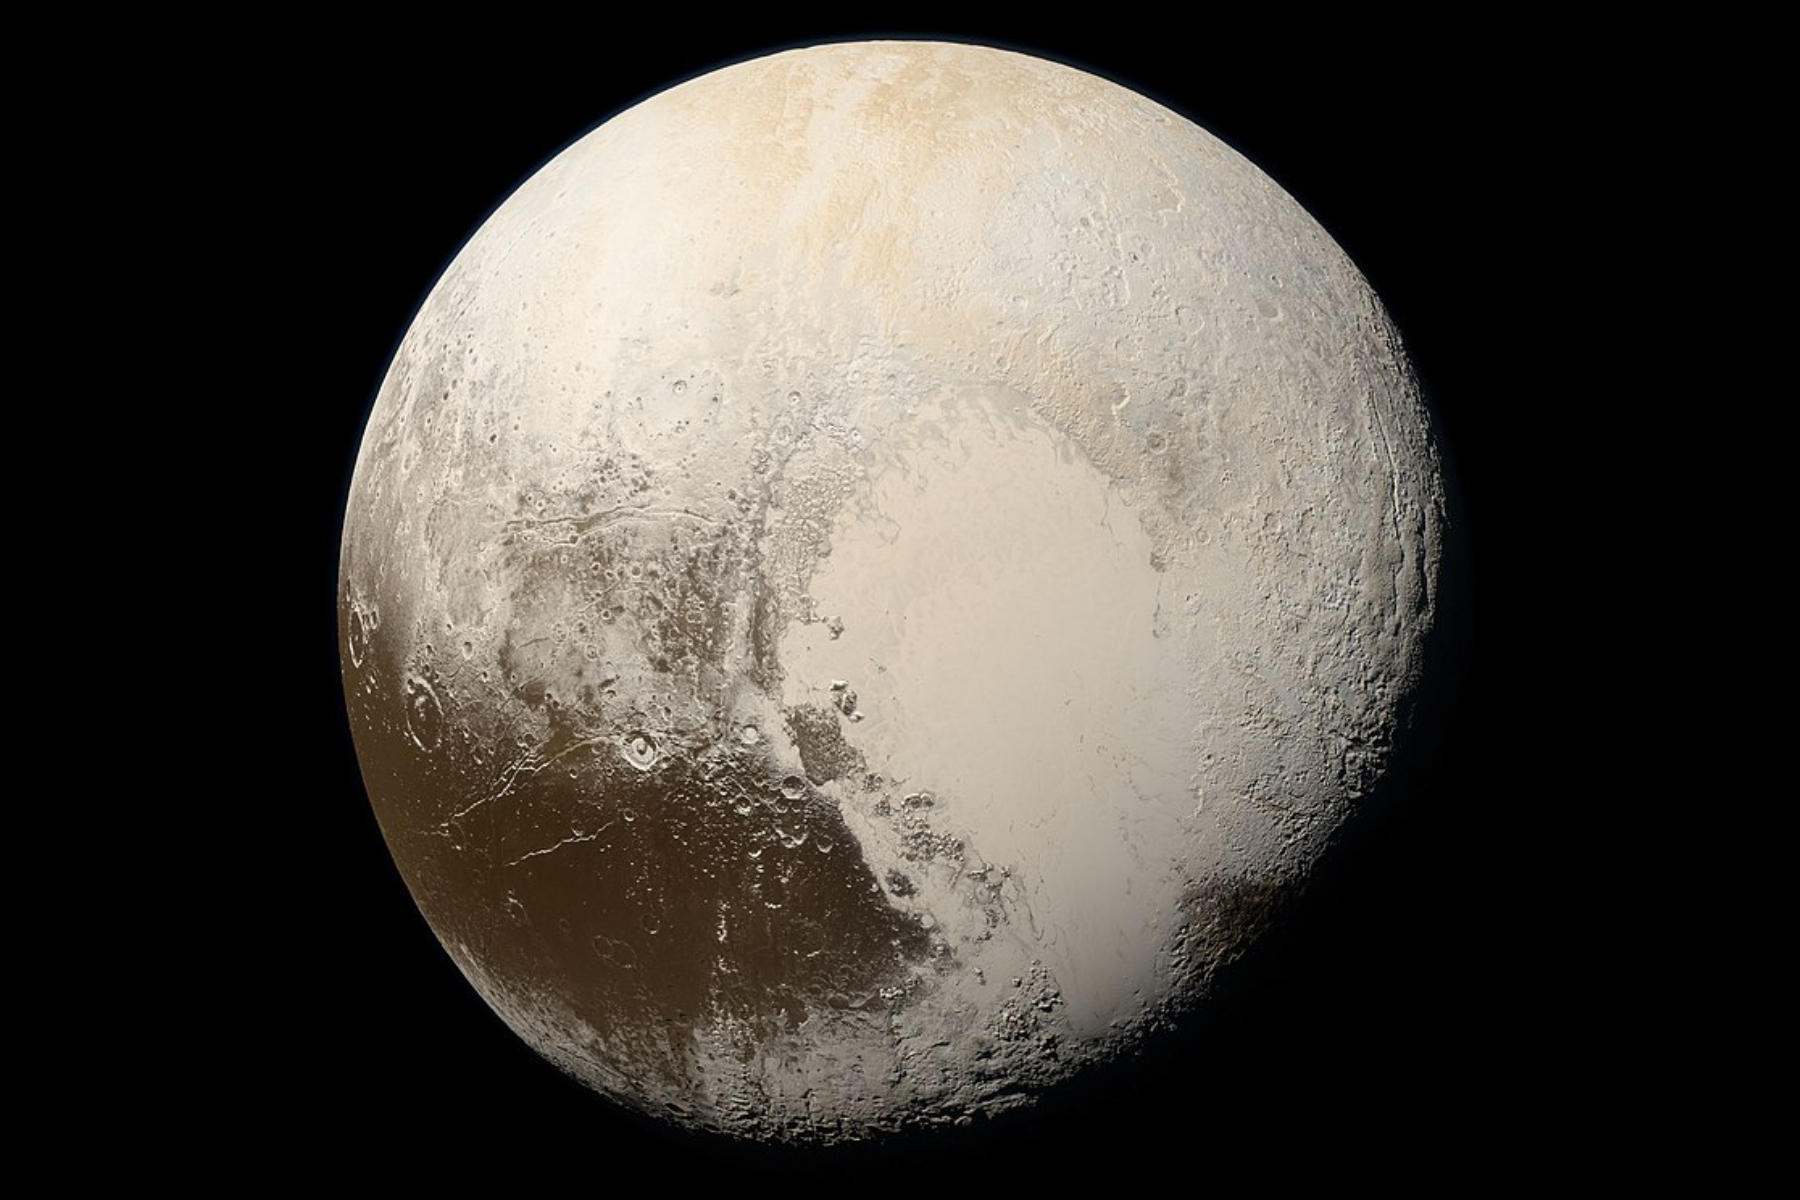 mystery of how pluto got its heart finally 'solved' by astrophysicists